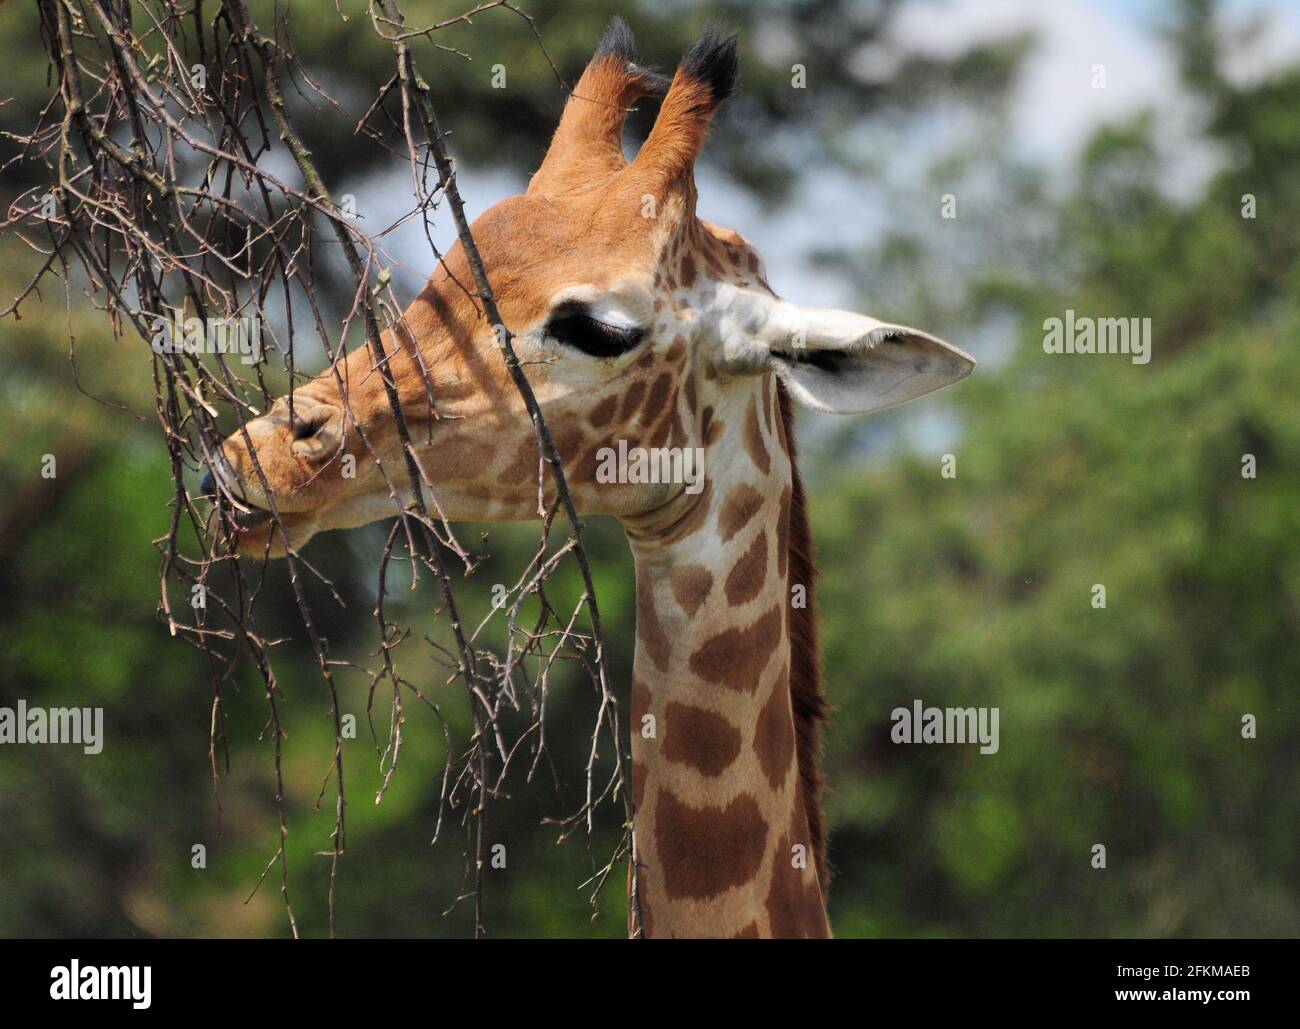 Close Up Of A Giraffe Eating Branches From A Tree On A Sunny Summer Day Stock Photo